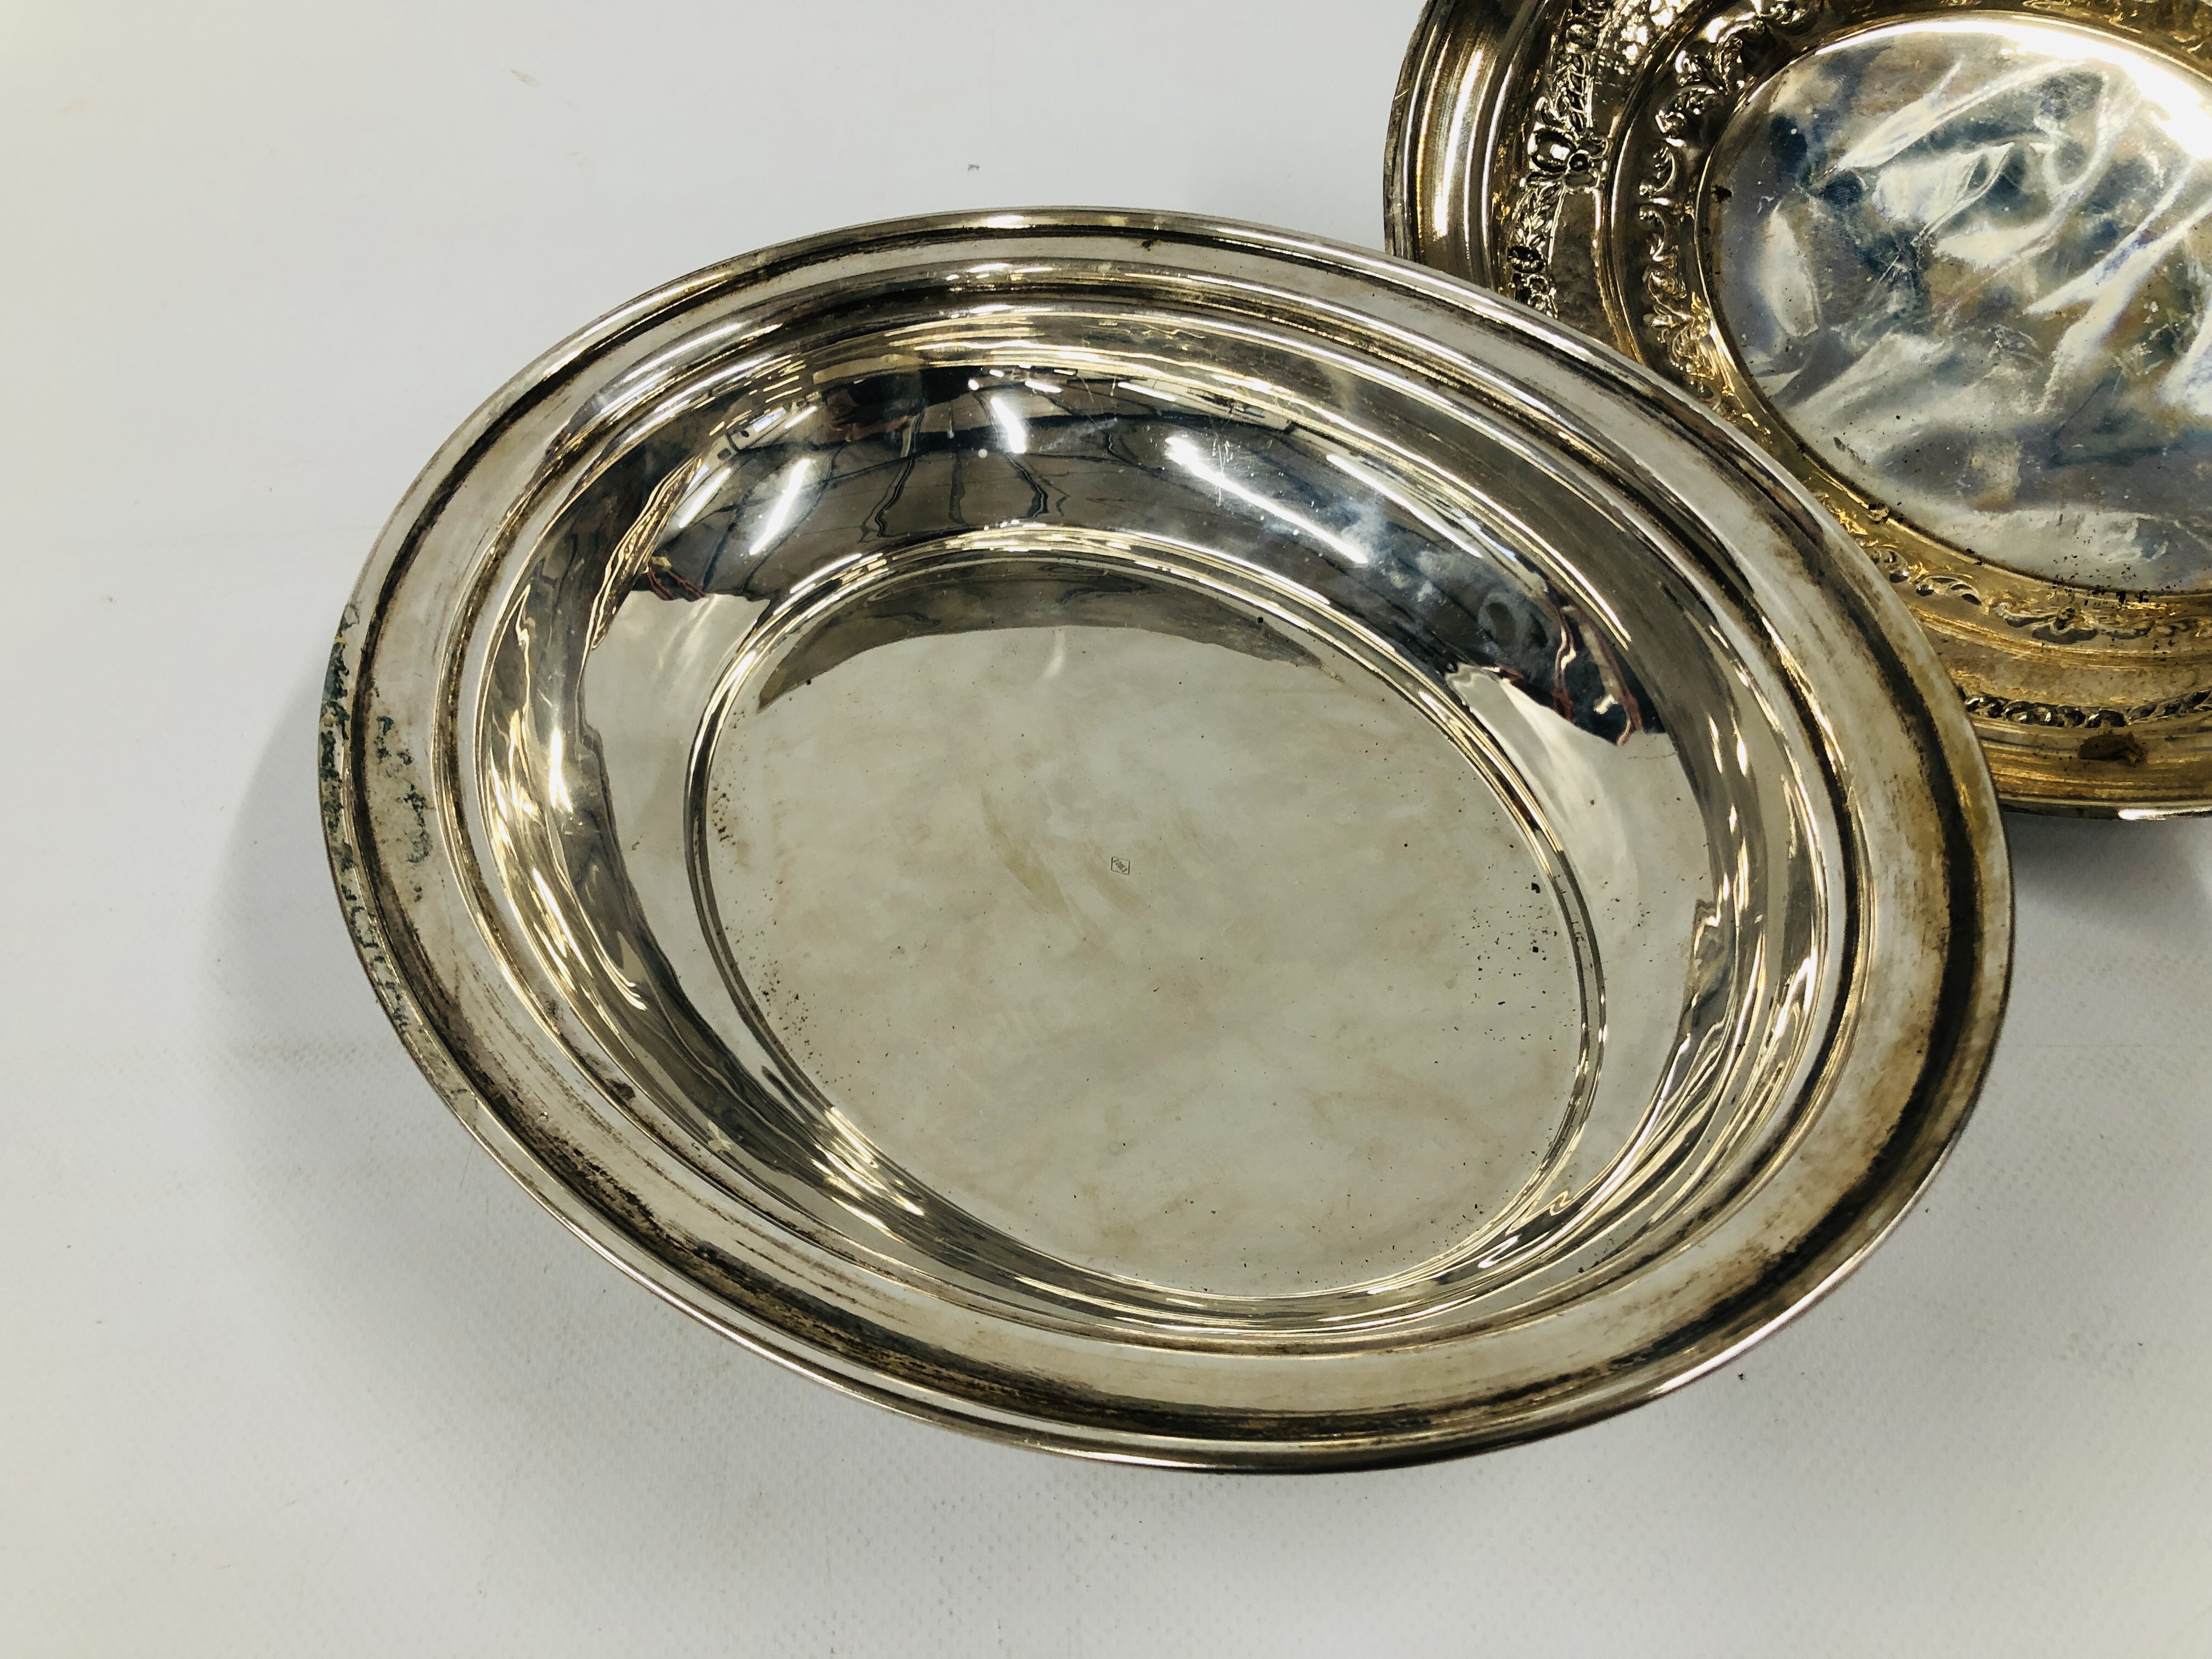 A CONTINENTAL SILVER OVAL TUREEN AND COVER, DECORATED WITH GARLANDS, BASE STAMPED 900, L 30. - Image 10 of 13